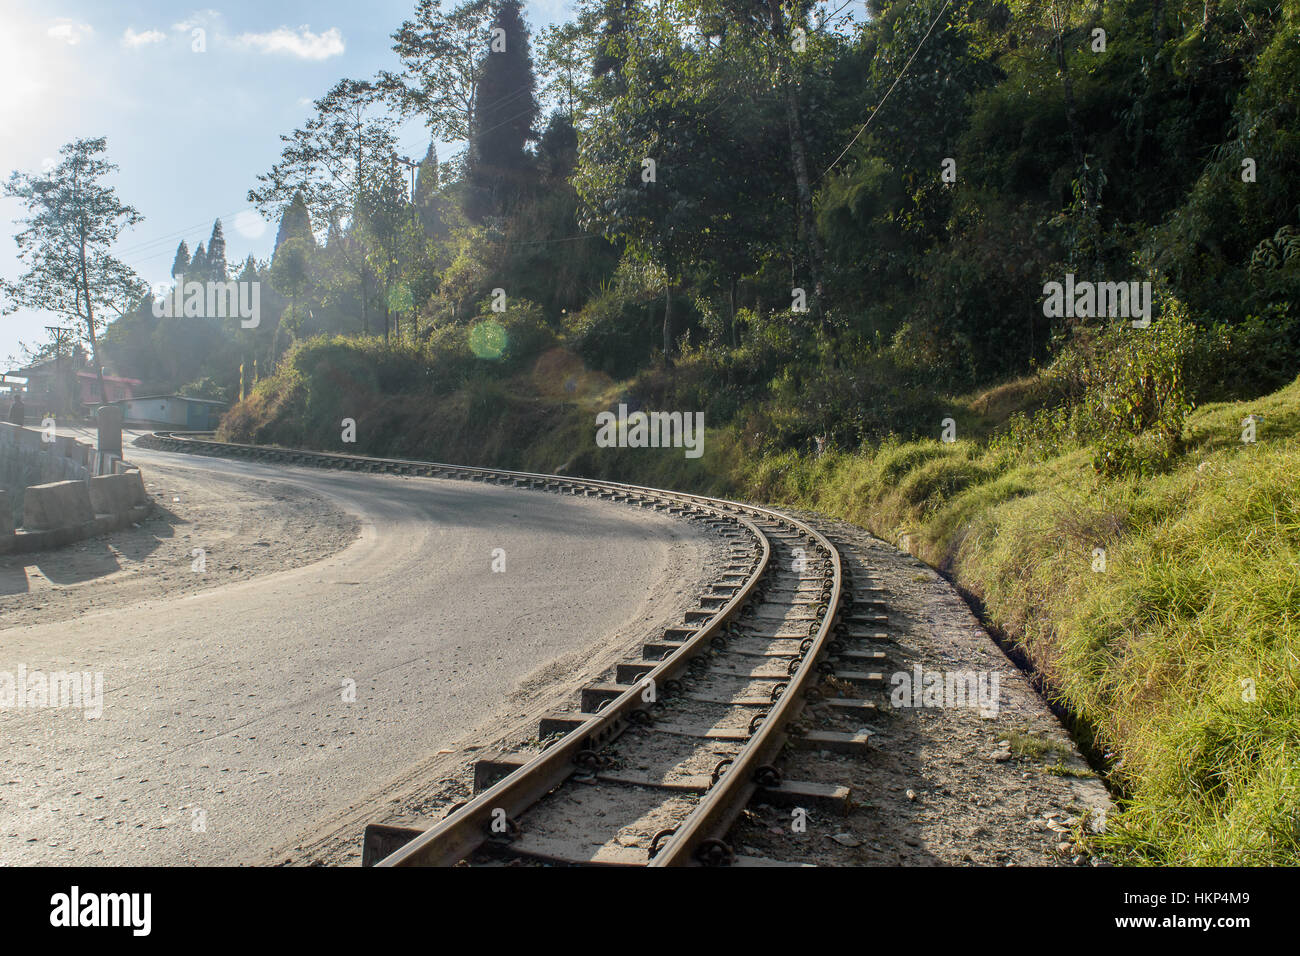 The 2 ft narrow gauge line of Darjeeling Toy train, that runs between New Jalpaiguri and Darjeeling in the Indian state of West Bengal, India. Stock Photo